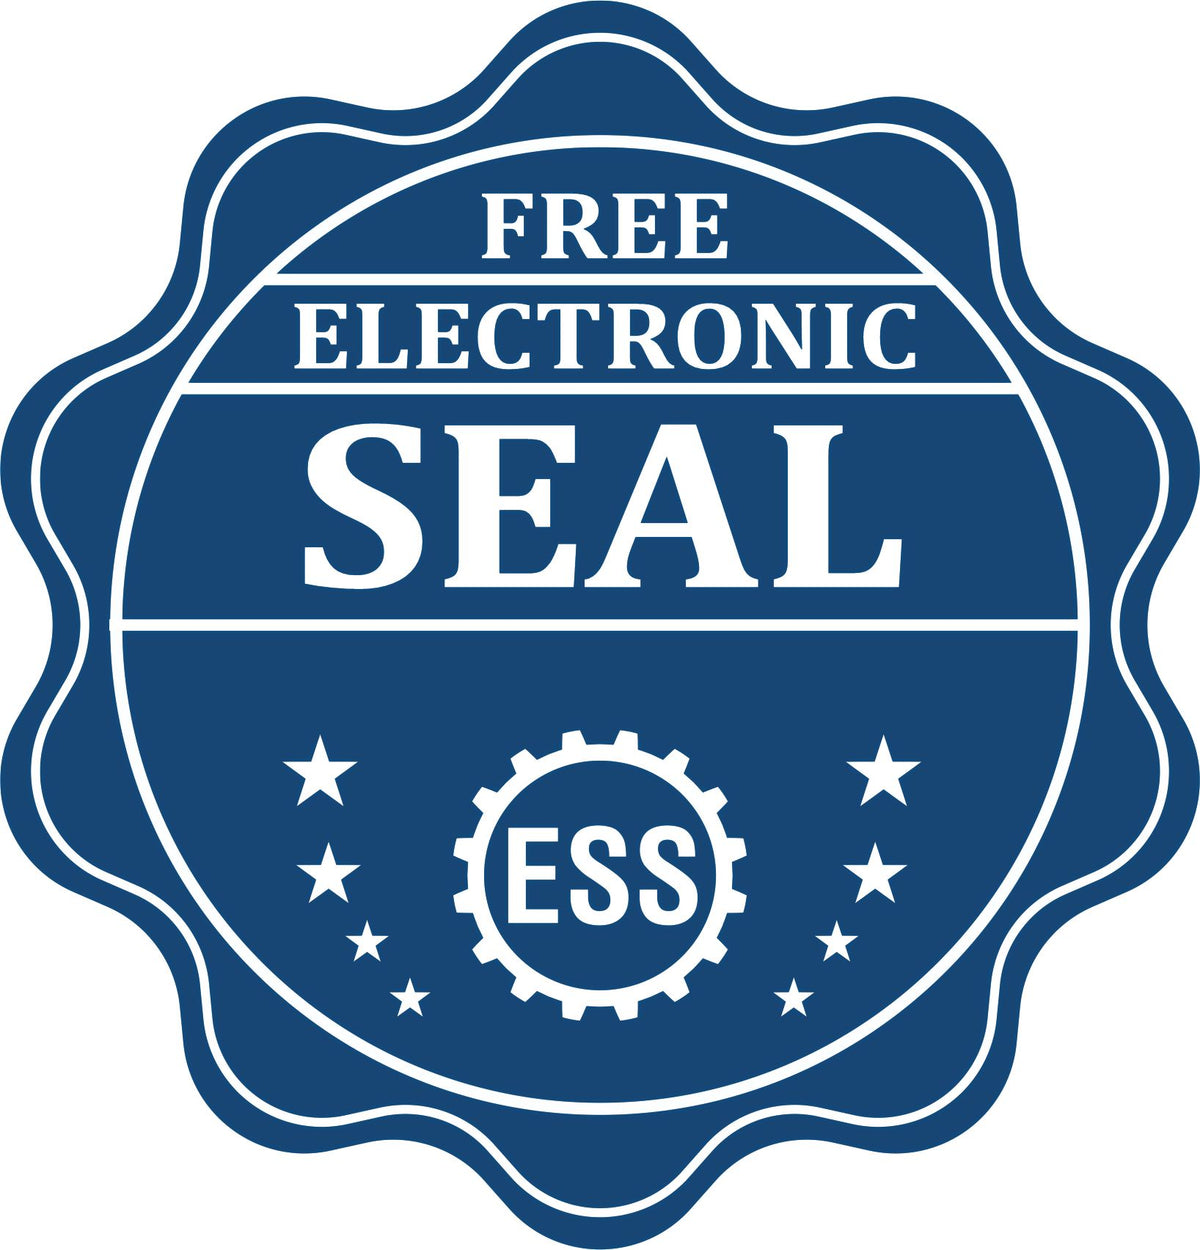 A badge showing a free electronic seal for the Hybrid South Carolina Engineer Seal with stars and the ESS gear on the emblem.